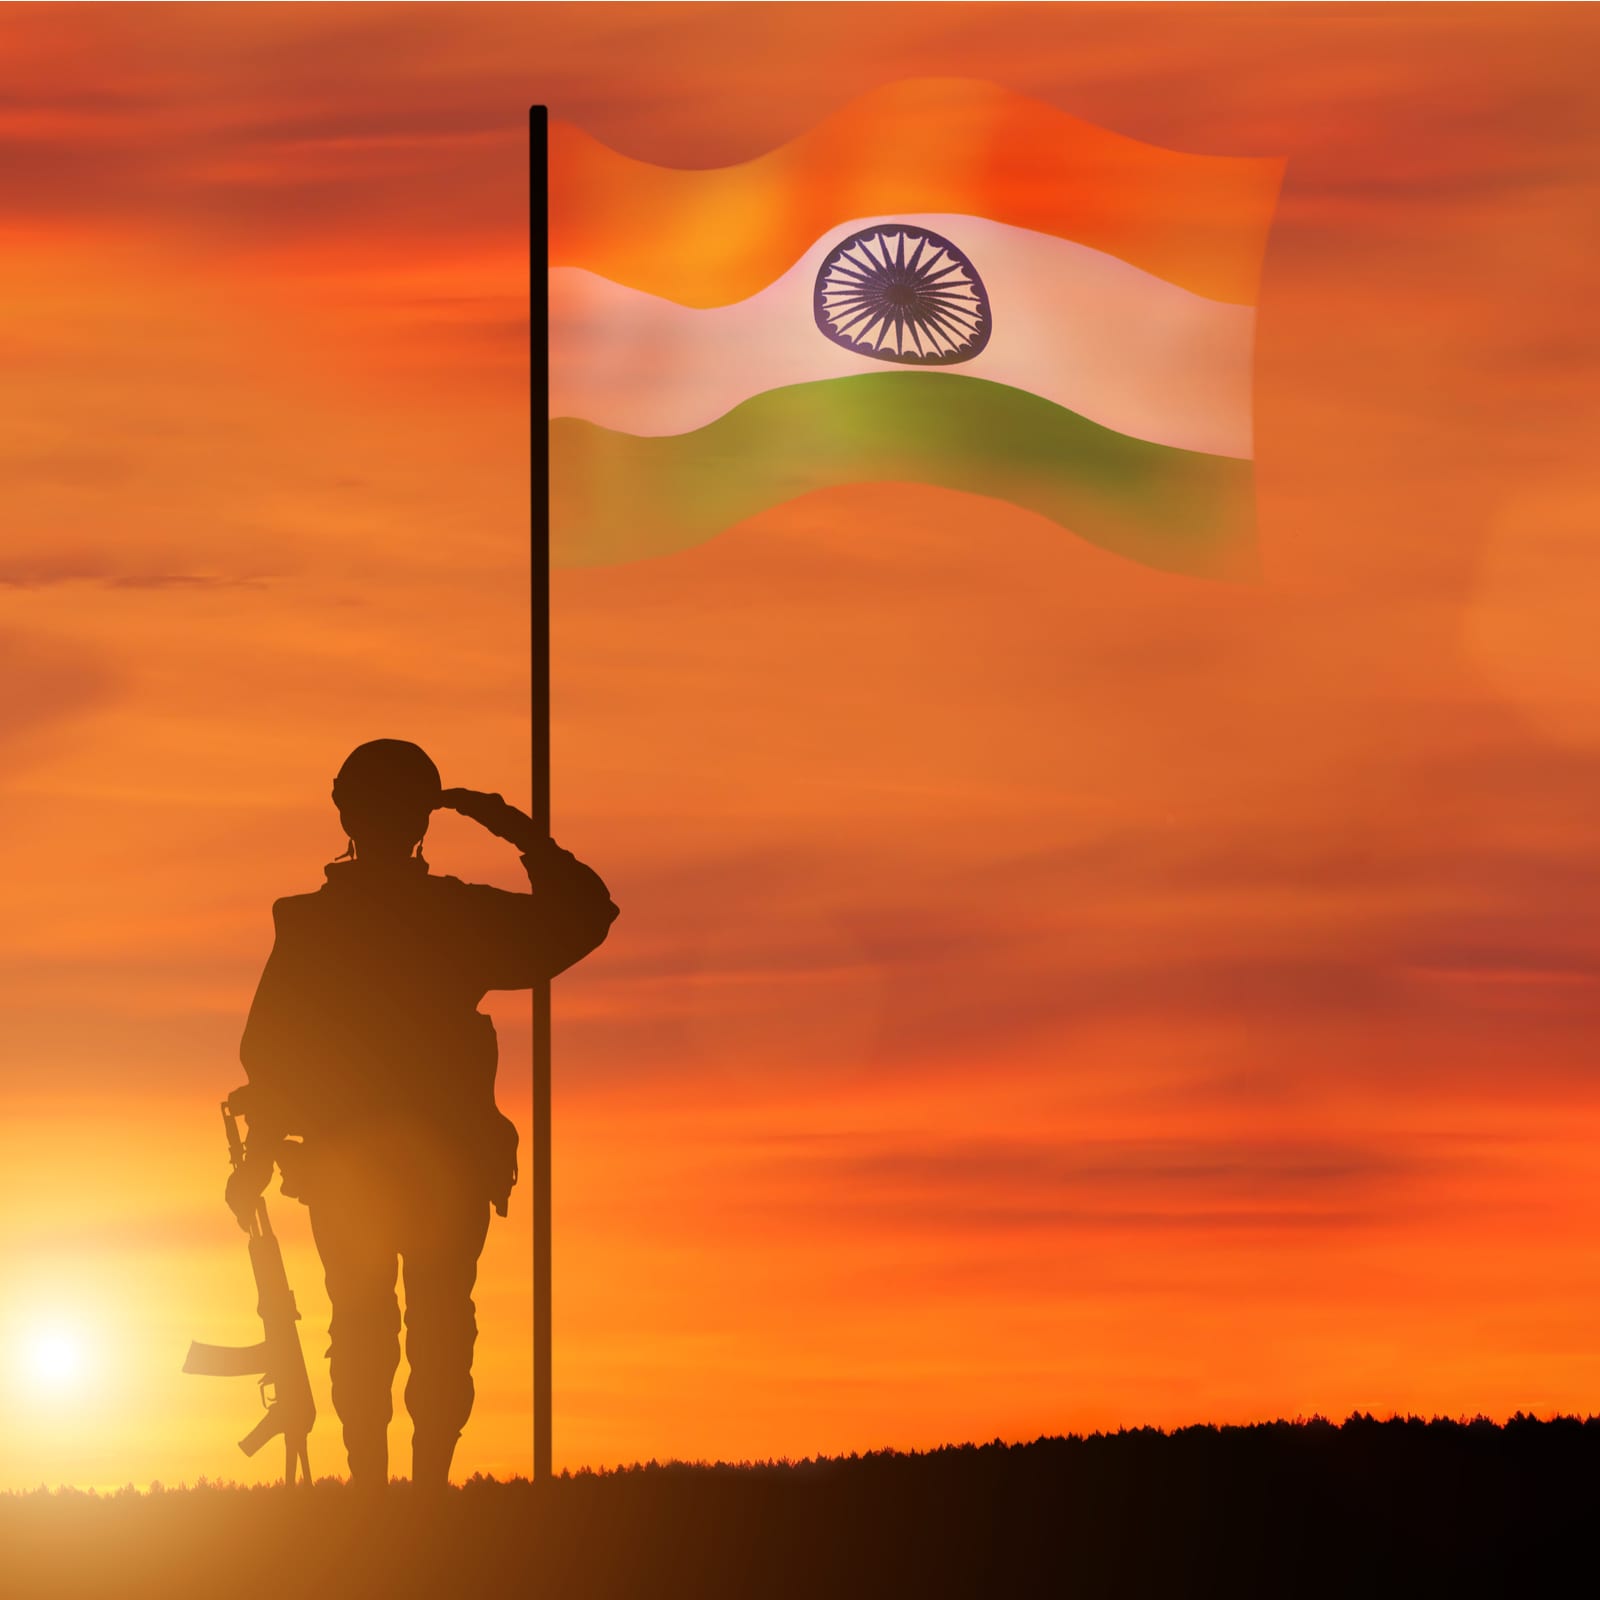 Armed Forces Veterans Day 2022: History, Significance and All You